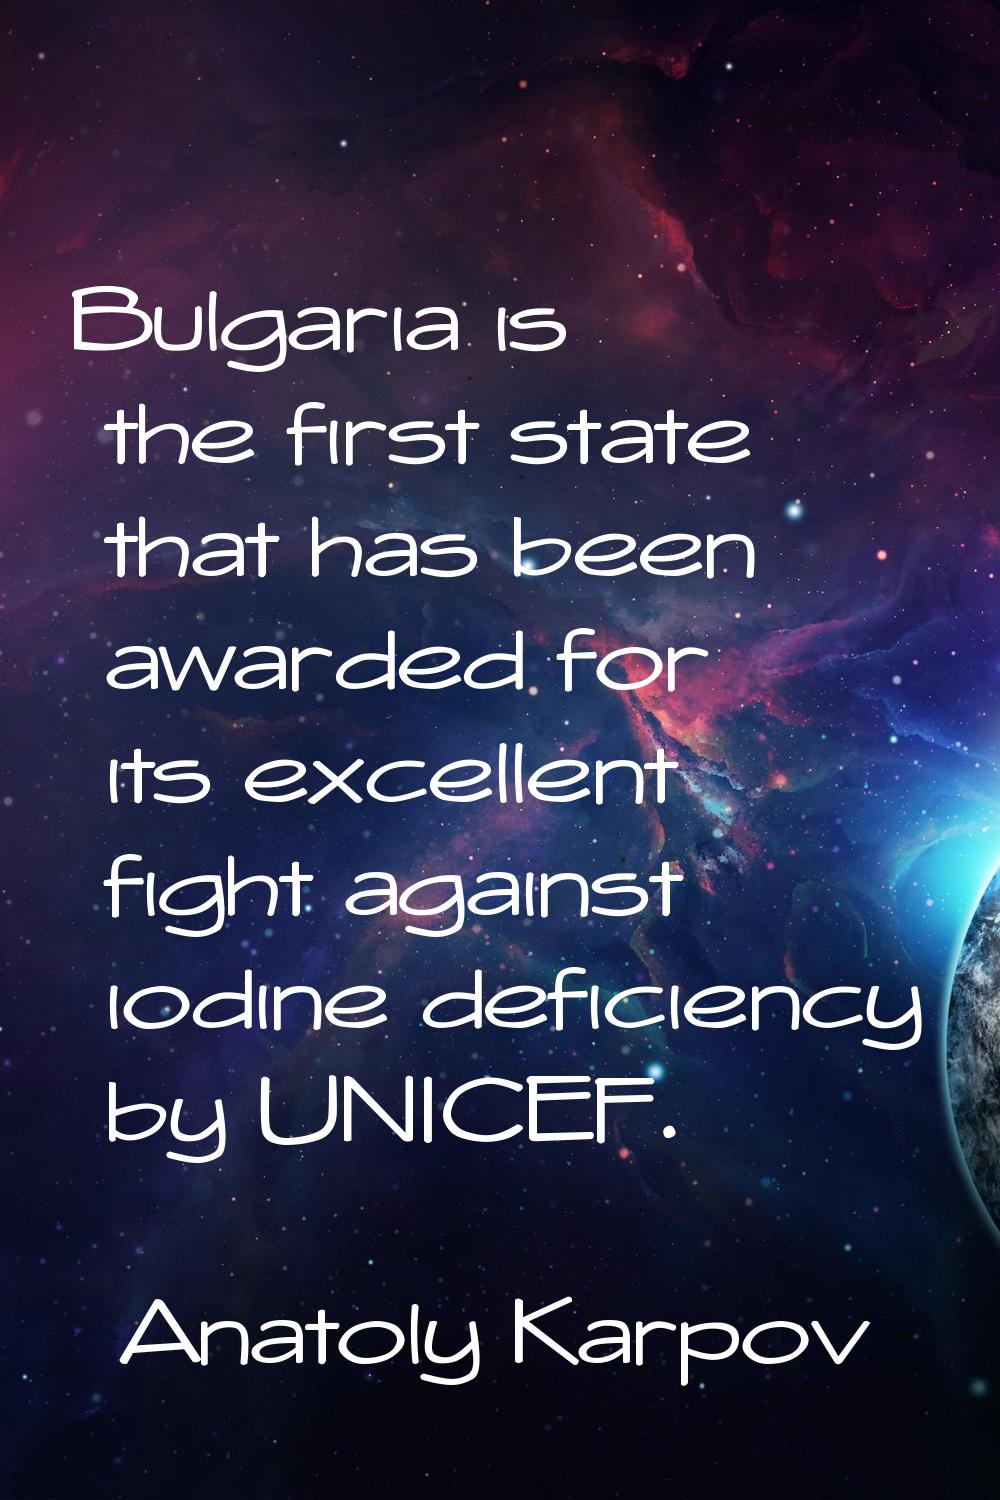 Bulgaria is the first state that has been awarded for its excellent fight against iodine deficiency